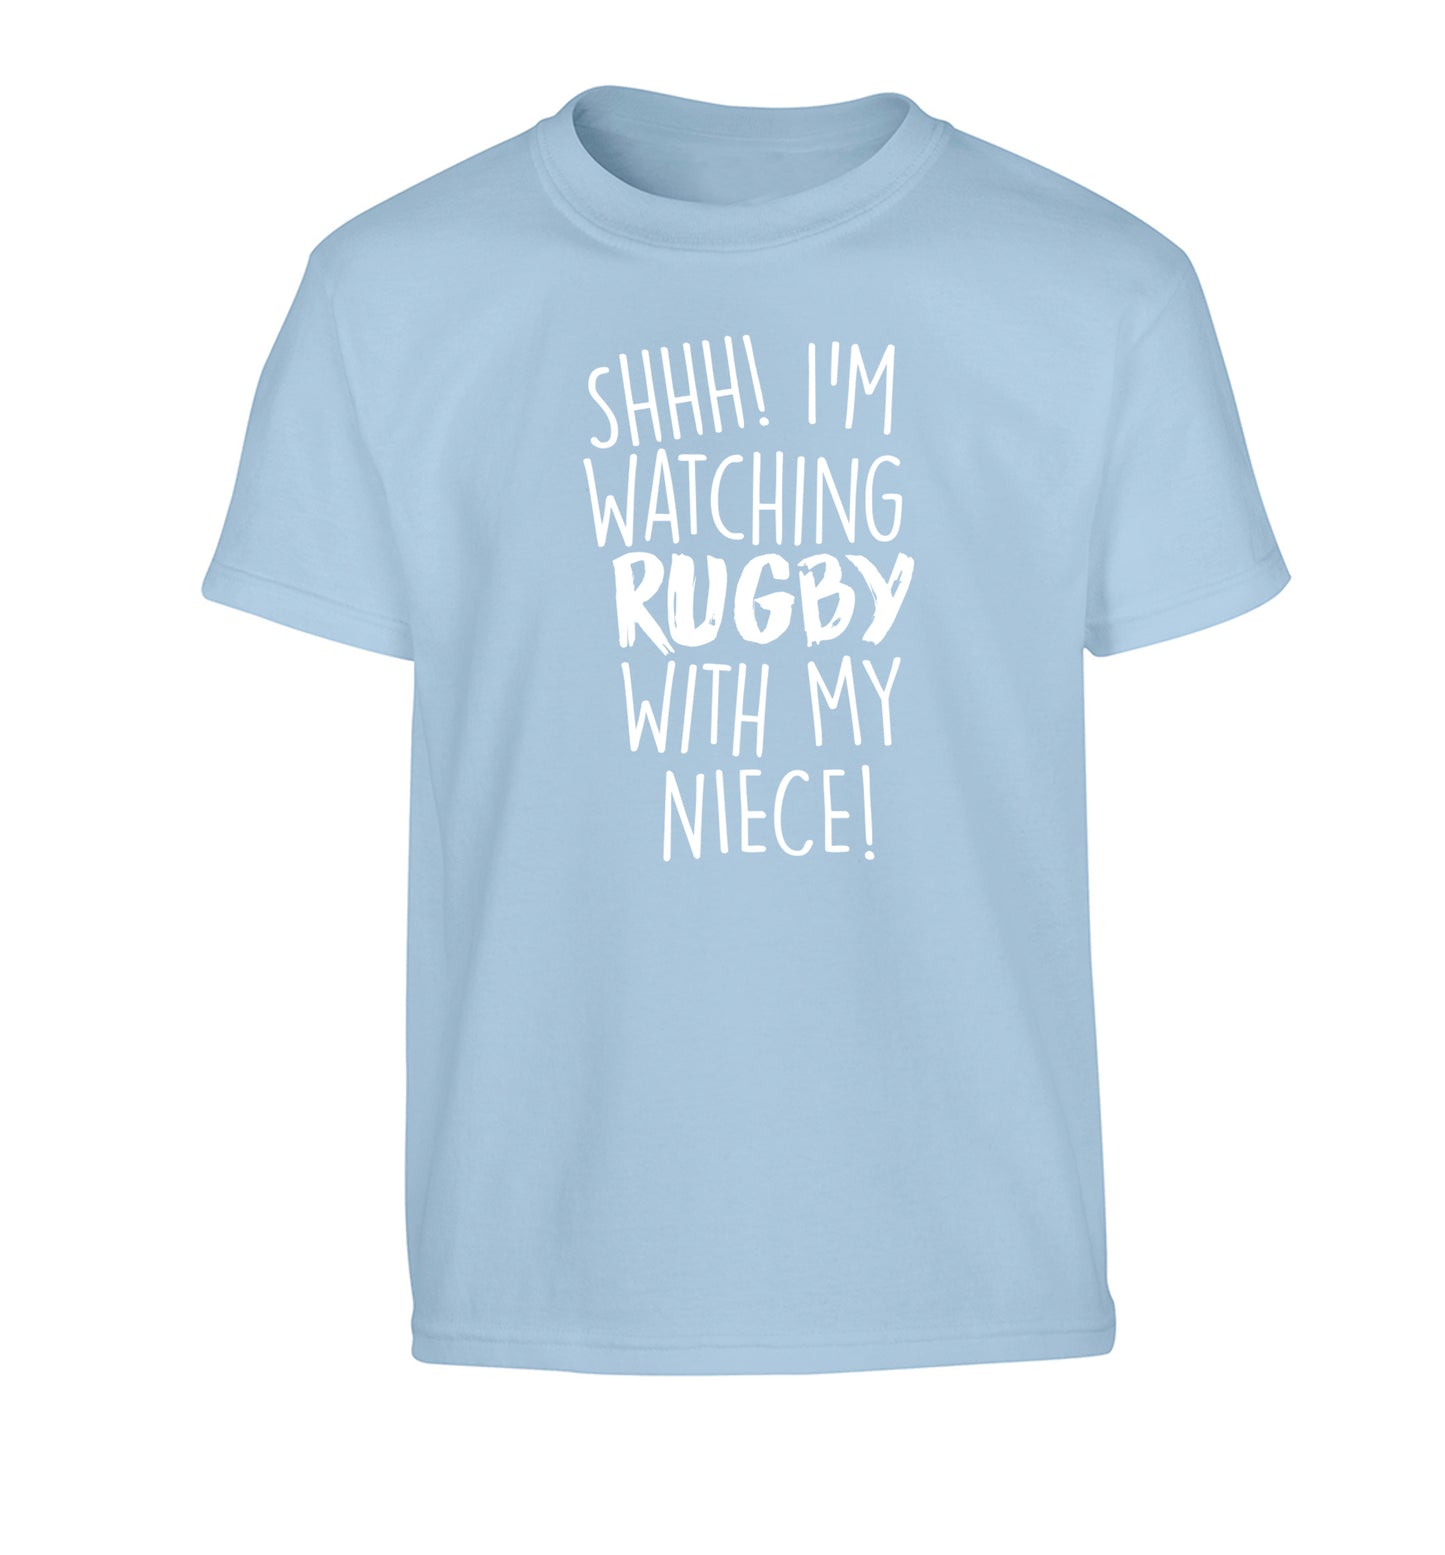 Shh.. I'm watching rugby with my niece Children's light blue Tshirt 12-13 Years